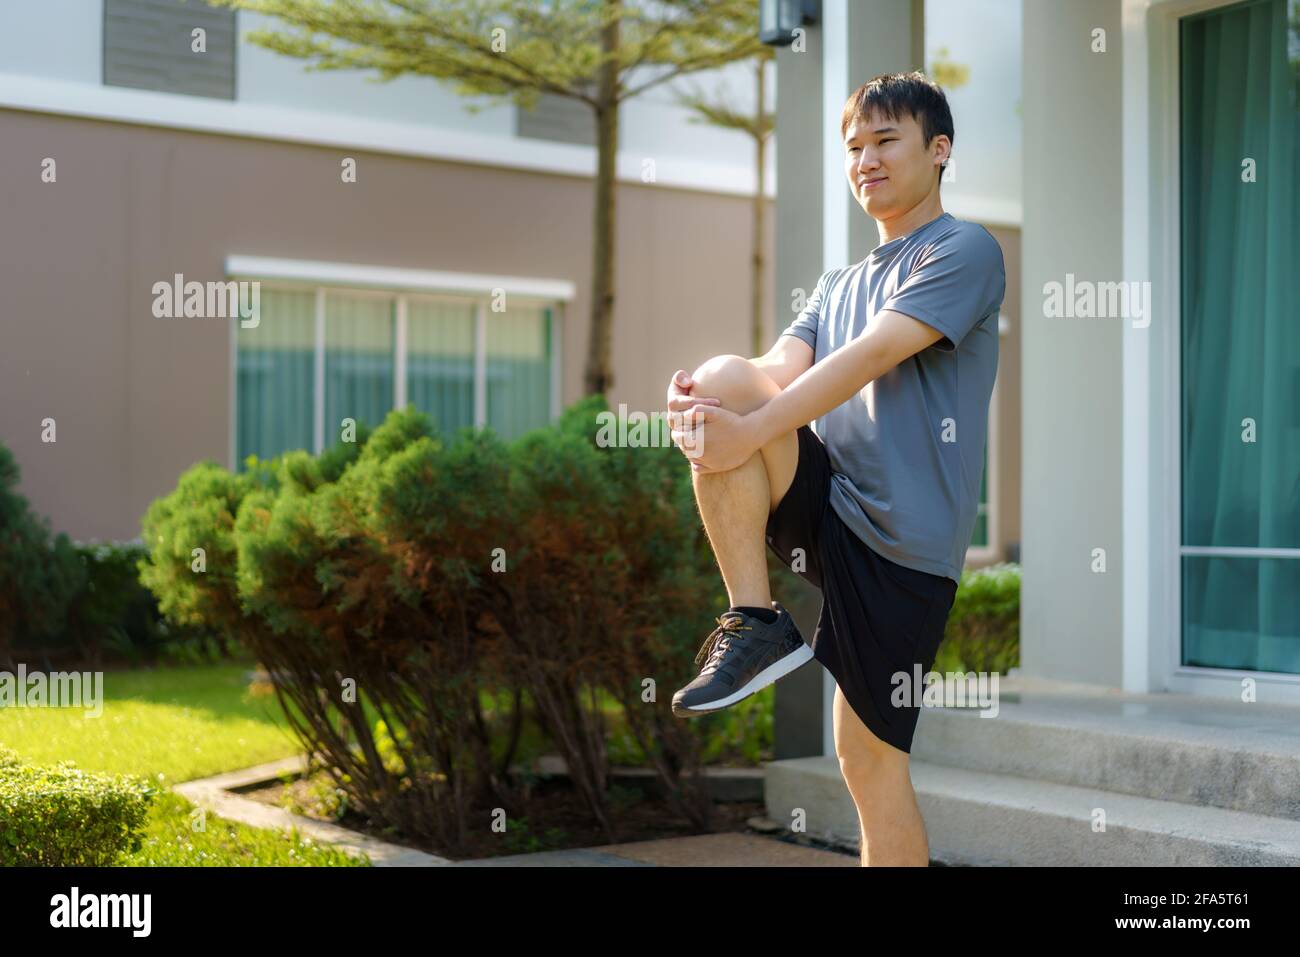 Asian man stretching to warm up or cool down, before or after exercise, near the front door in the neighborhood for daily health and well being, both Stock Photo